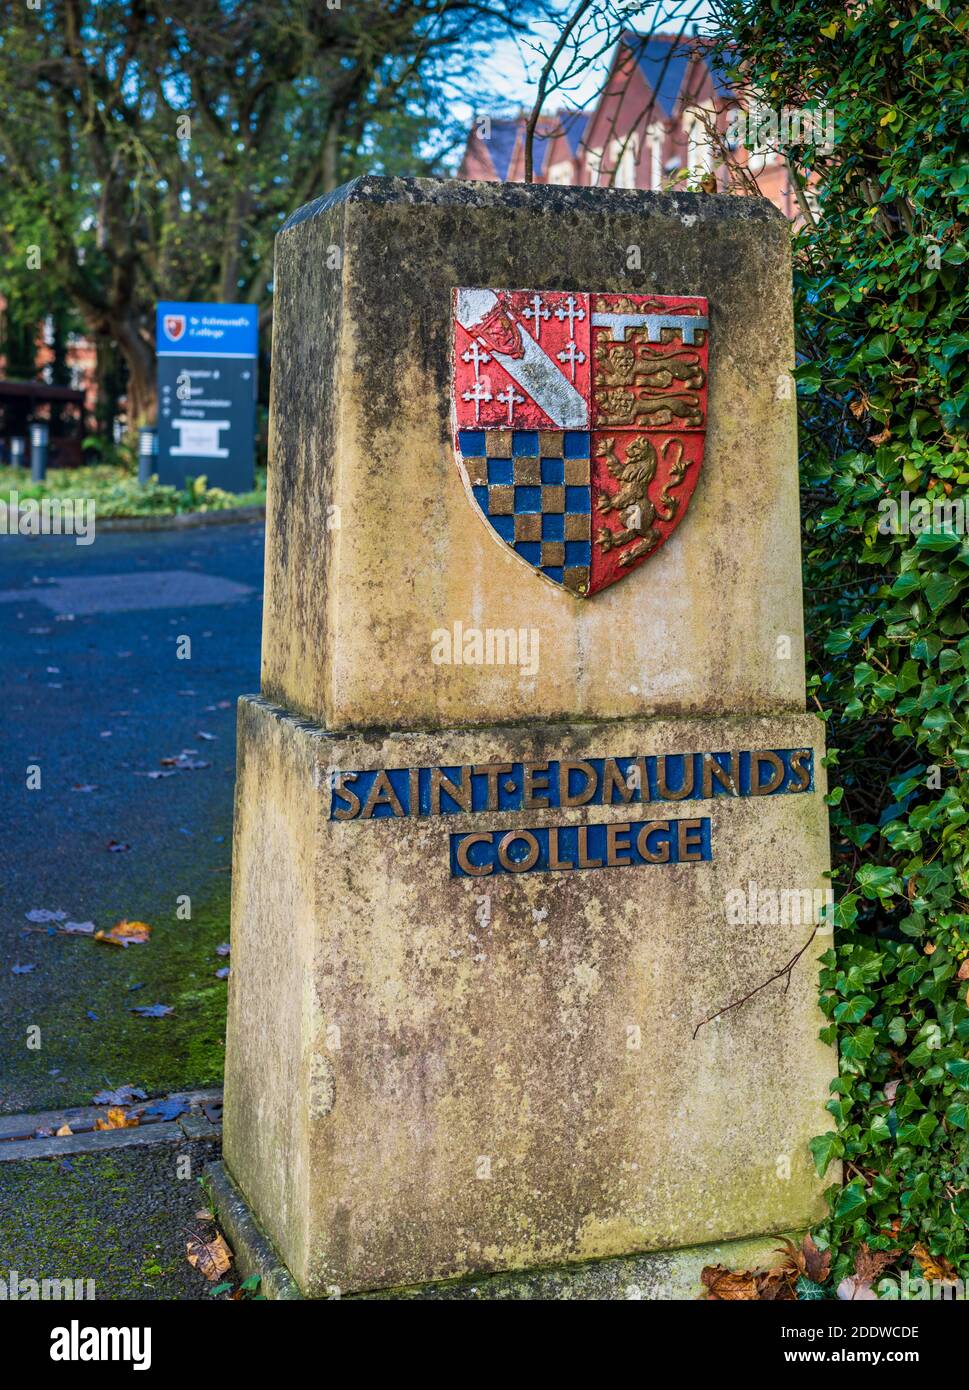 St Edmund's College Cambridge - Sign at the entrance gates to St Edmund's College Cambridge - Founded in 1896, accepts only mature students, over 21. Stock Photo